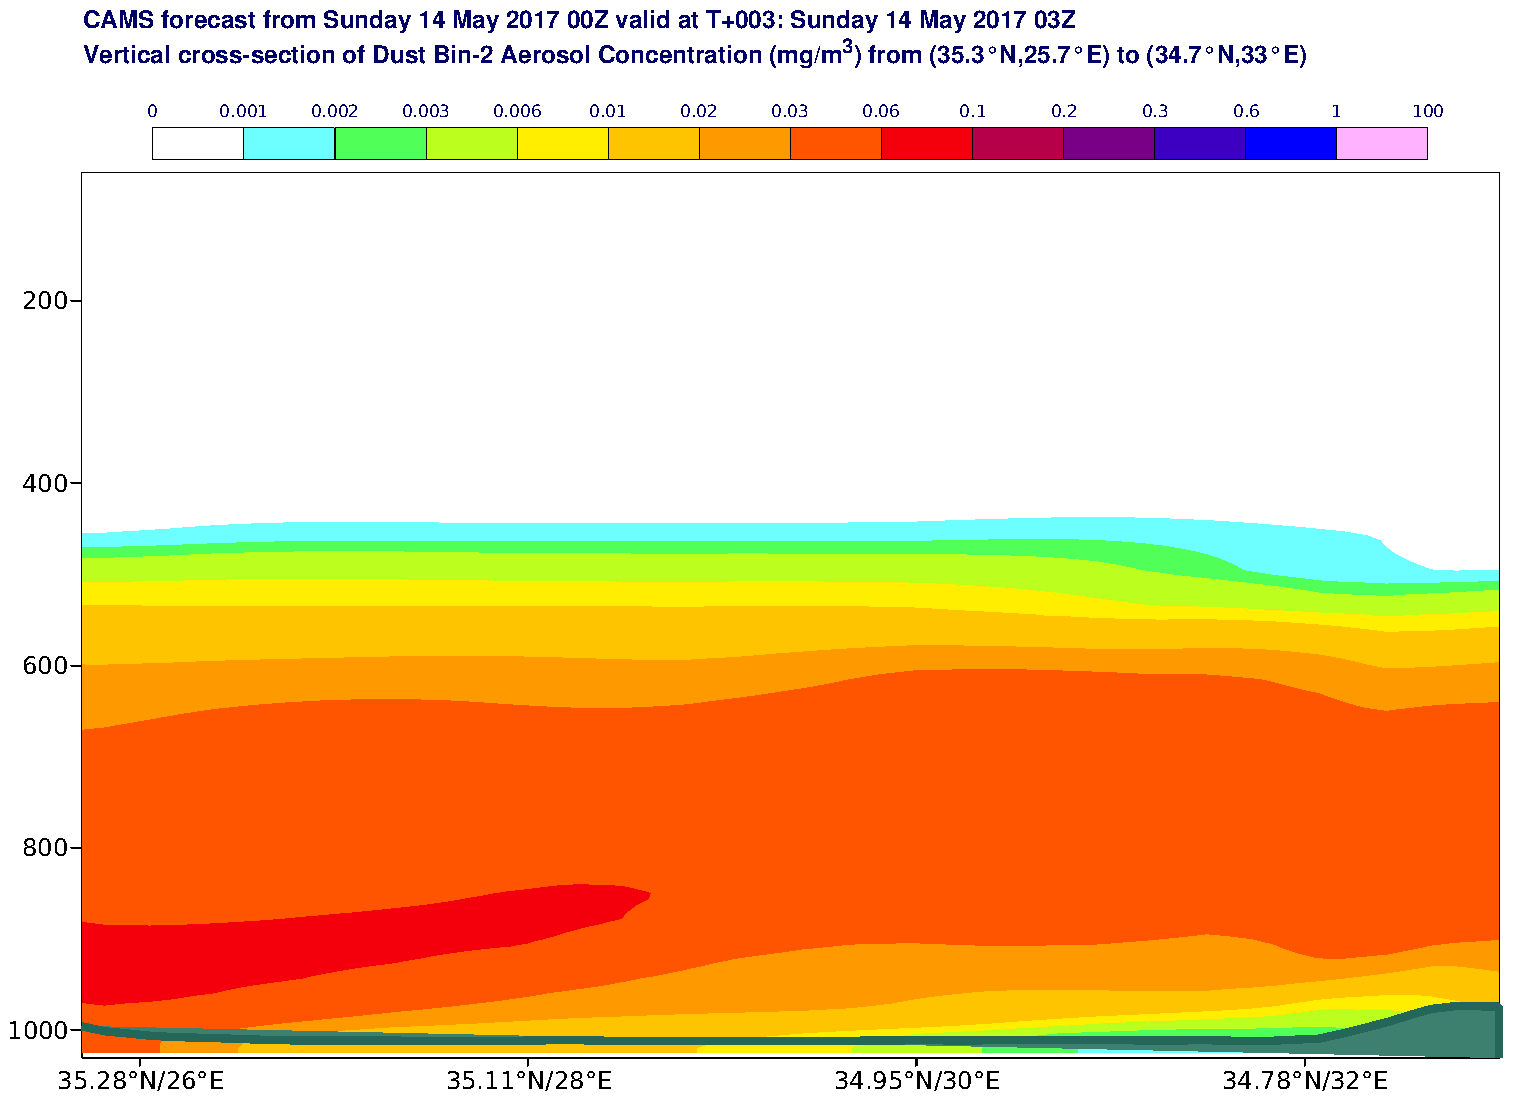 Vertical cross-section of Dust Bin-2 Aerosol Concentration (mg/m3) valid at T3 - 2017-05-14 03:00